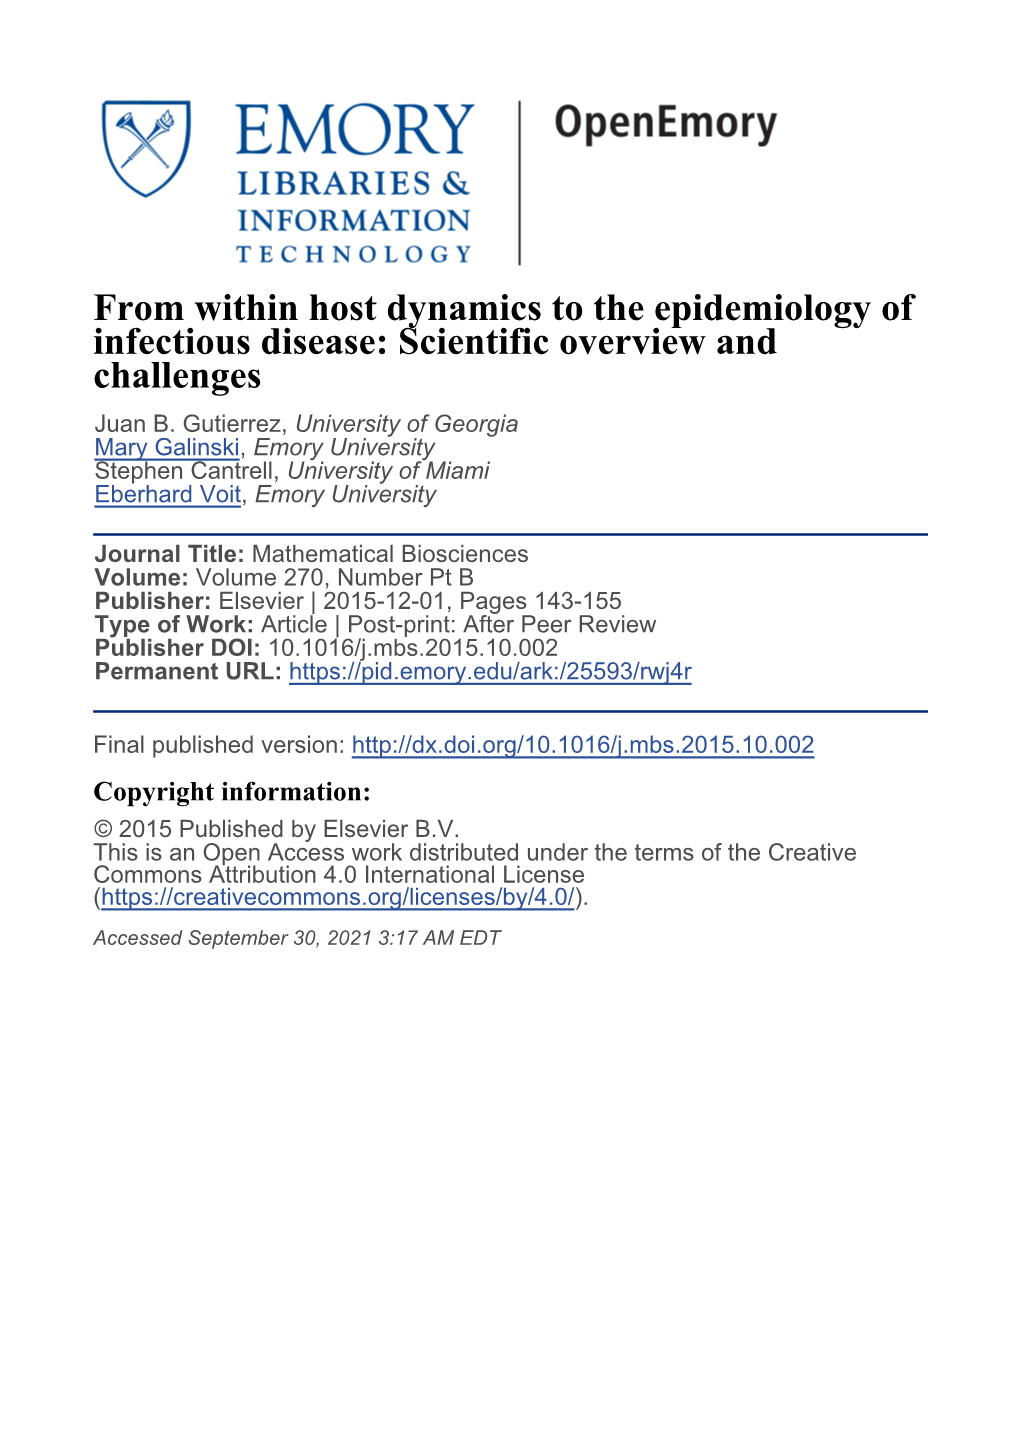 From Within Host Dynamics to the Epidemiology of Infectious Disease: Scientific Overview and Challenges Juan B